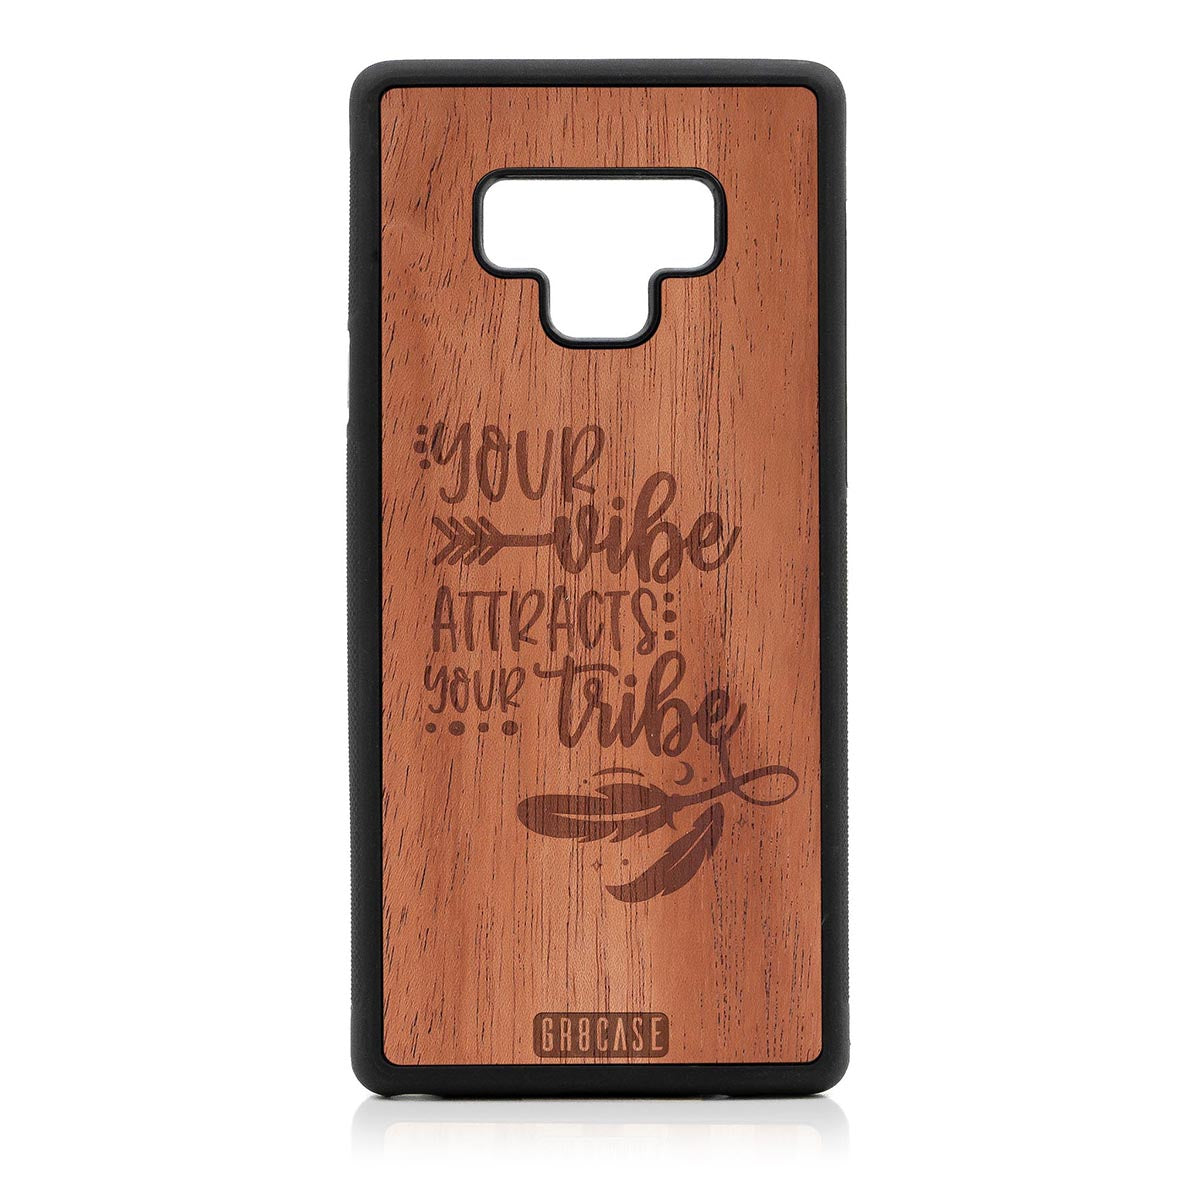 Your Vibe Attracts Your Tribe Design Wood Case Samsung Galaxy Note 9